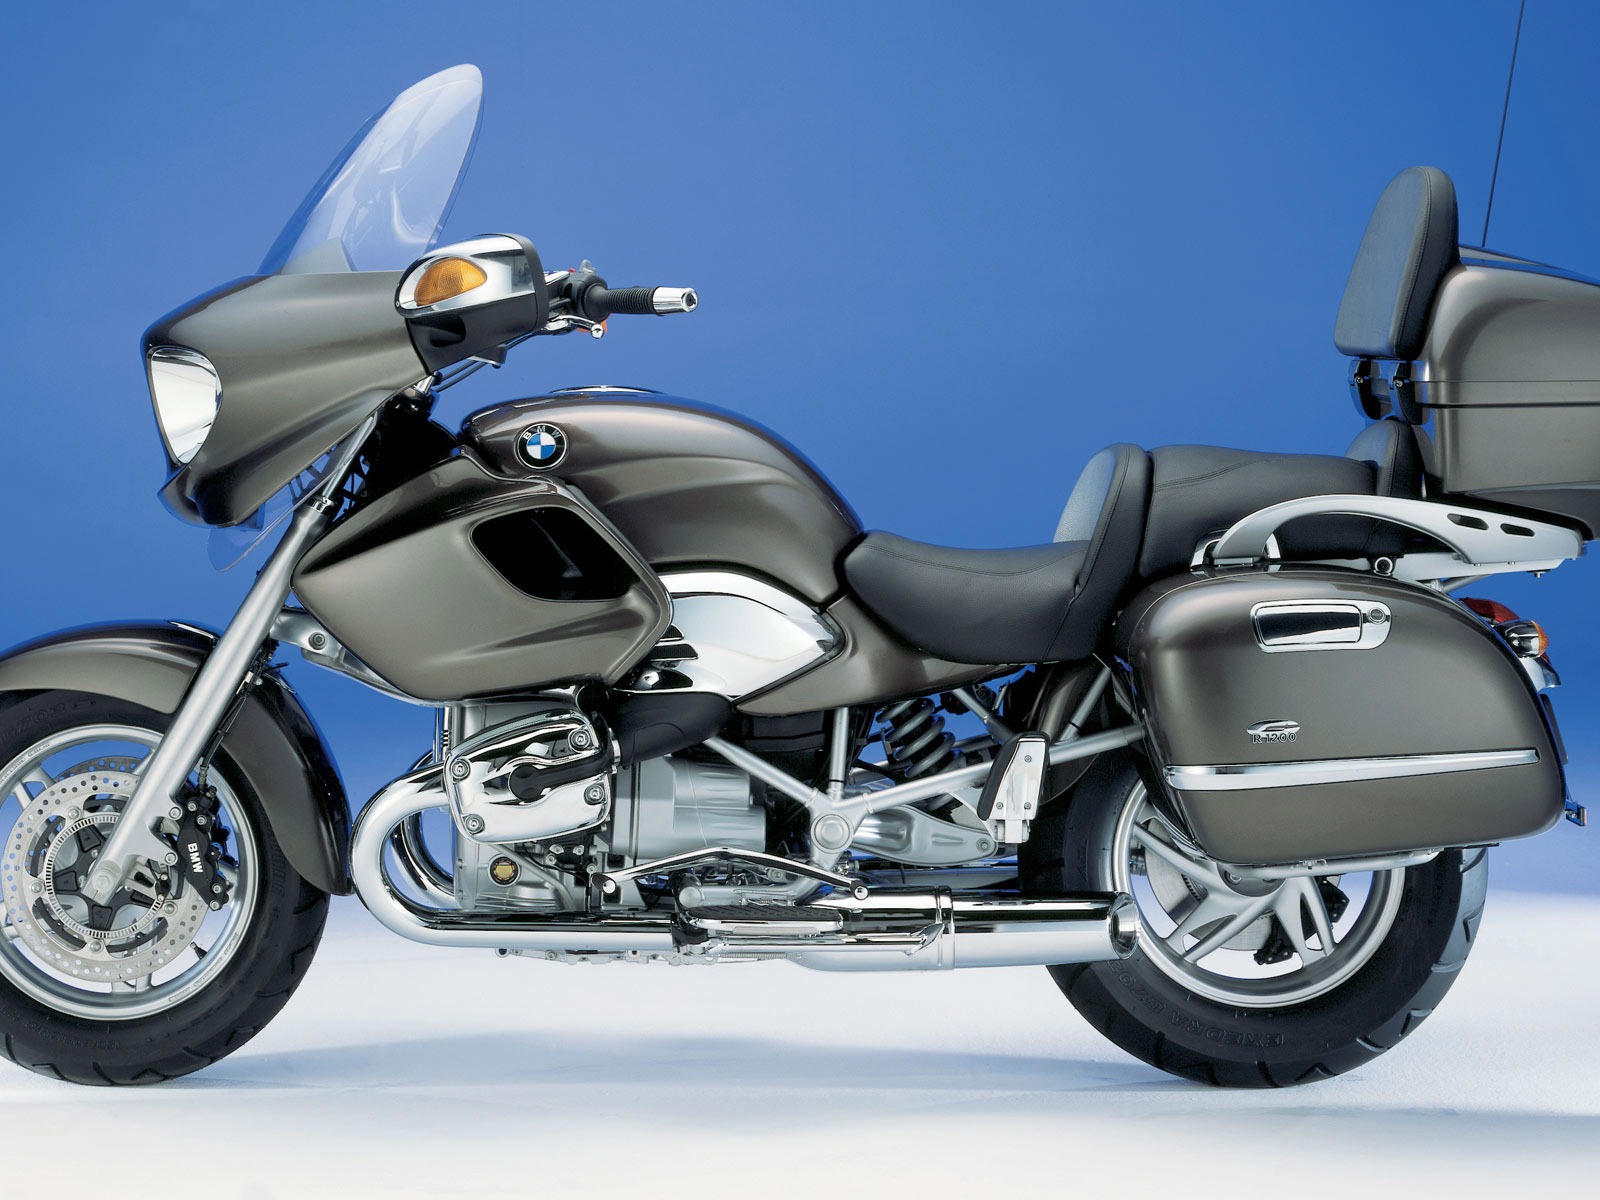 BMW motorcycle wallpapers (2) #19 - 1600x1200